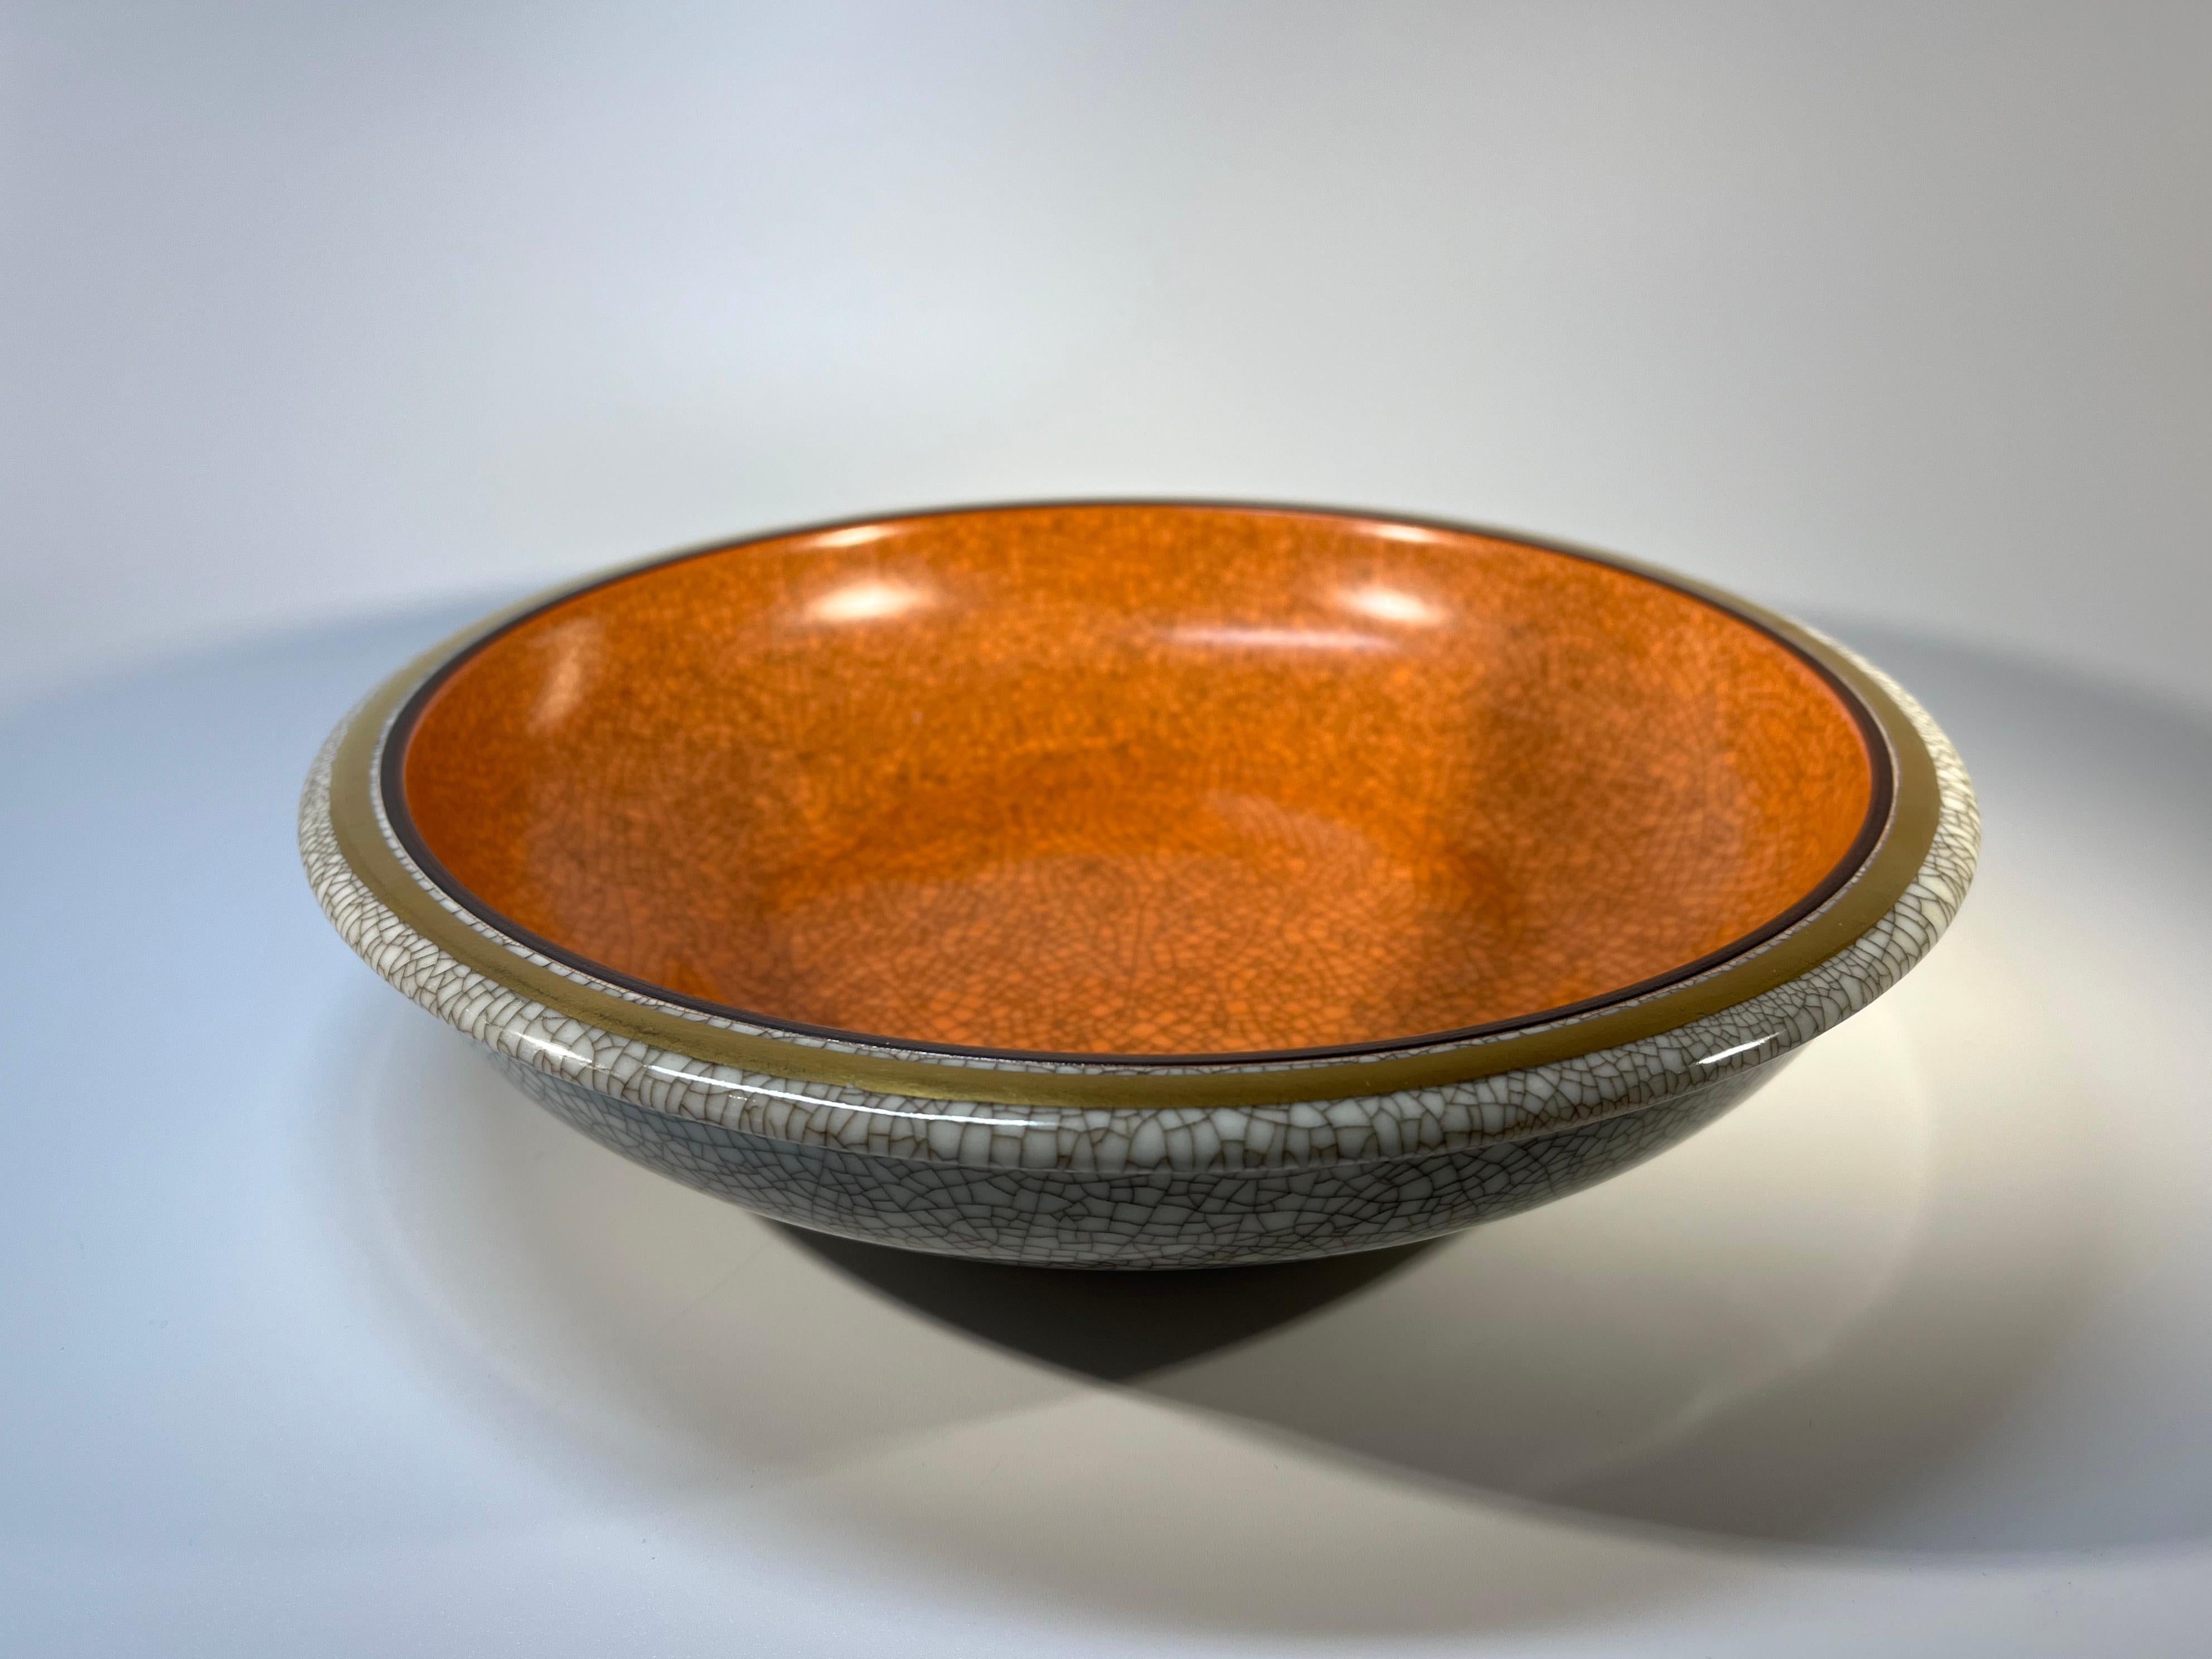 Thorkild Olsenl terracotta matt glaze dish for Royal Copenhagen
A large functional piece decorated with gilded band to rim
Circa 1954
Stamped and numbered 3606
Height 2 inch, Diameter 9.75 inch
In good condition. Note, this piece is factory marked B